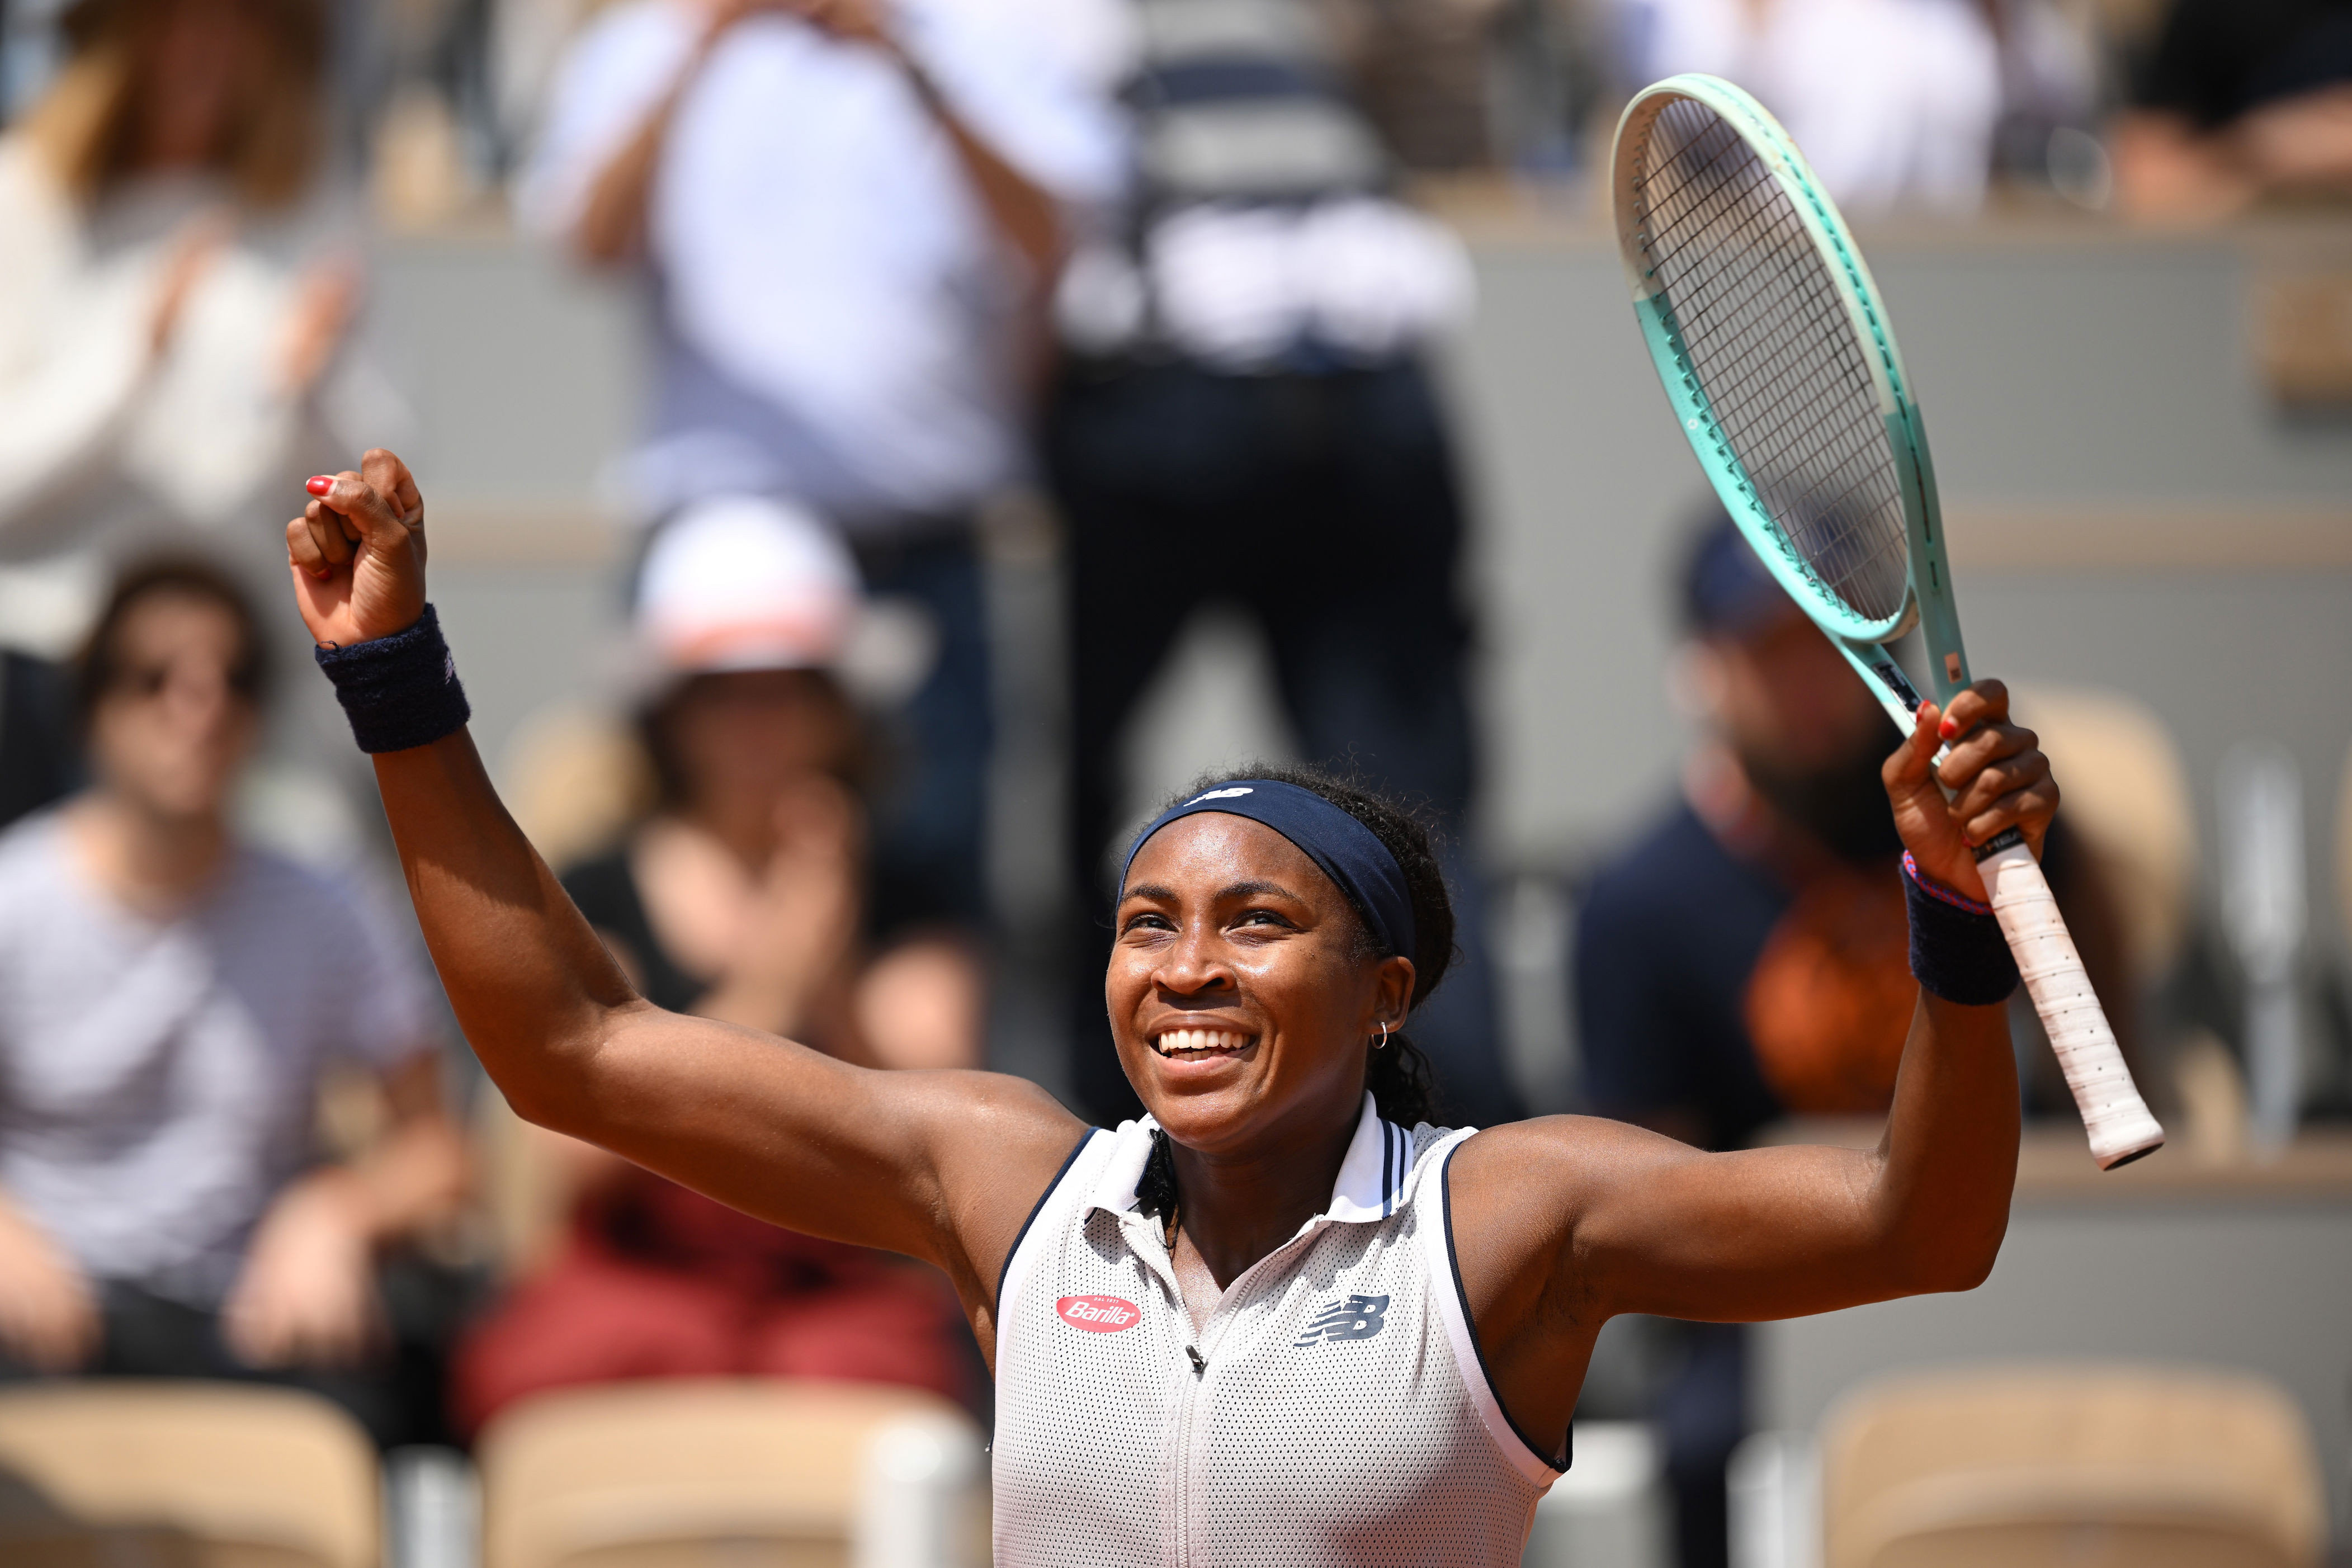 <p>When you're inspired by <strong><a href="https://www.brit.co/venus-and-serena-williams/">Serena Williams</a></strong>, anything is possible — especially if you're Coco Gauff. She's so amazing at what she does that, according to <strong><a href="https://time.com/collection/time100-leadership-series/6970223/coco-gauff-interview-2024/"><em>Time</em></a></strong>, she became the <em>first</em> teen to ever win the U.S. Open. Winning a Grand Slam is definitely no easy feat, but she worked — and continues to work — hard to accomplish her massive success.</p><p>Though it's too early to tell, we're predicting that she's going to secure several wins during the 2024 Summer Olympics. We'll be watching and rooting for her! </p>